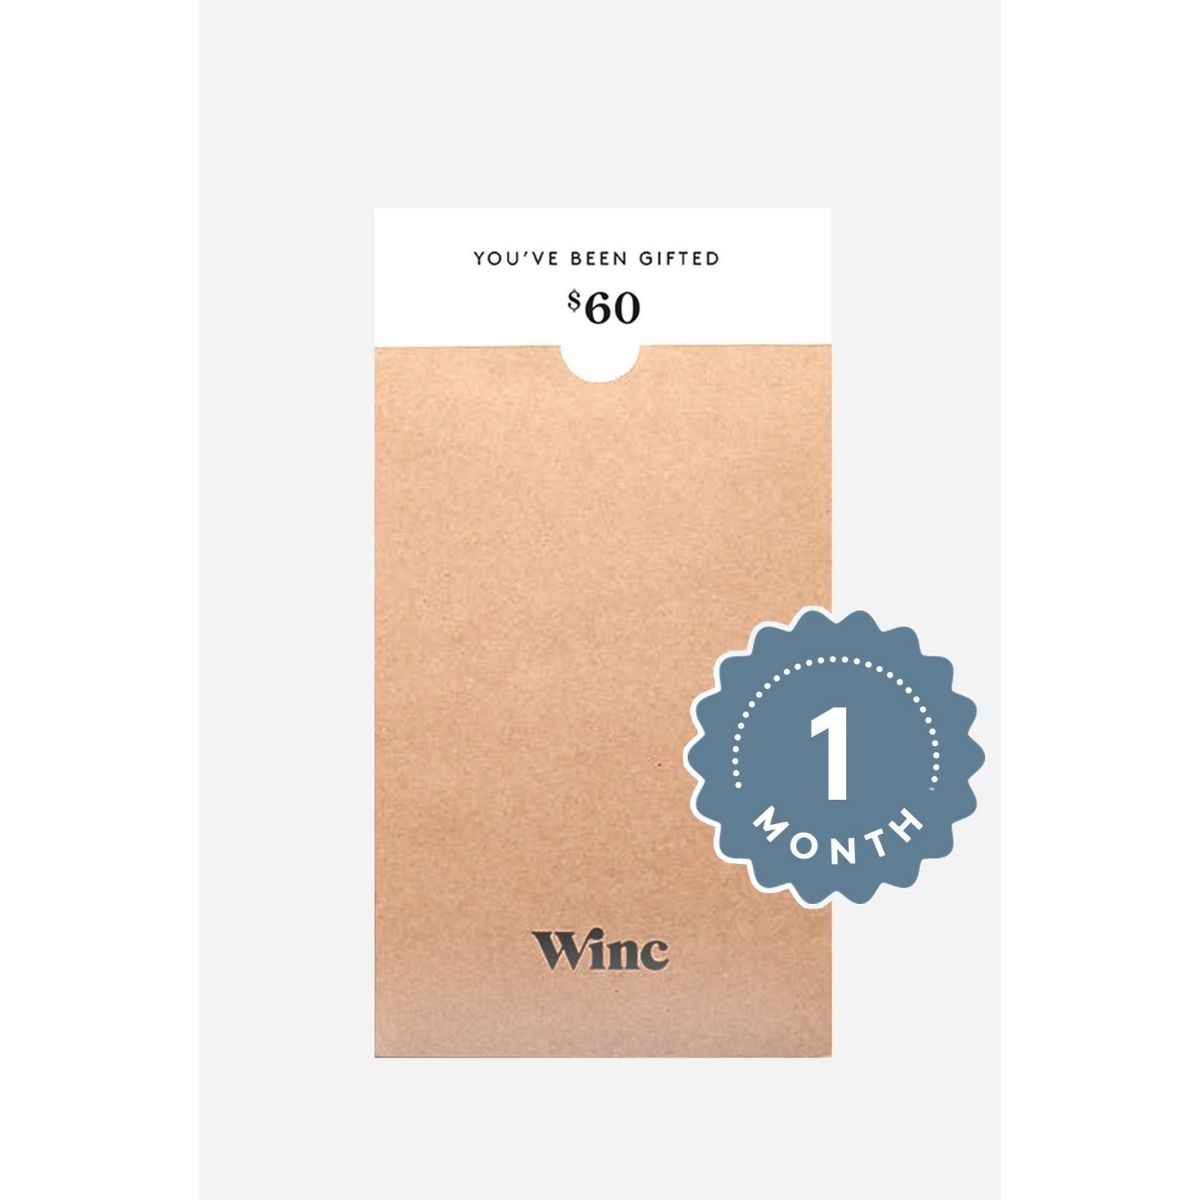 The Best Gifts for Wine Lovers Option: Winc Subscription